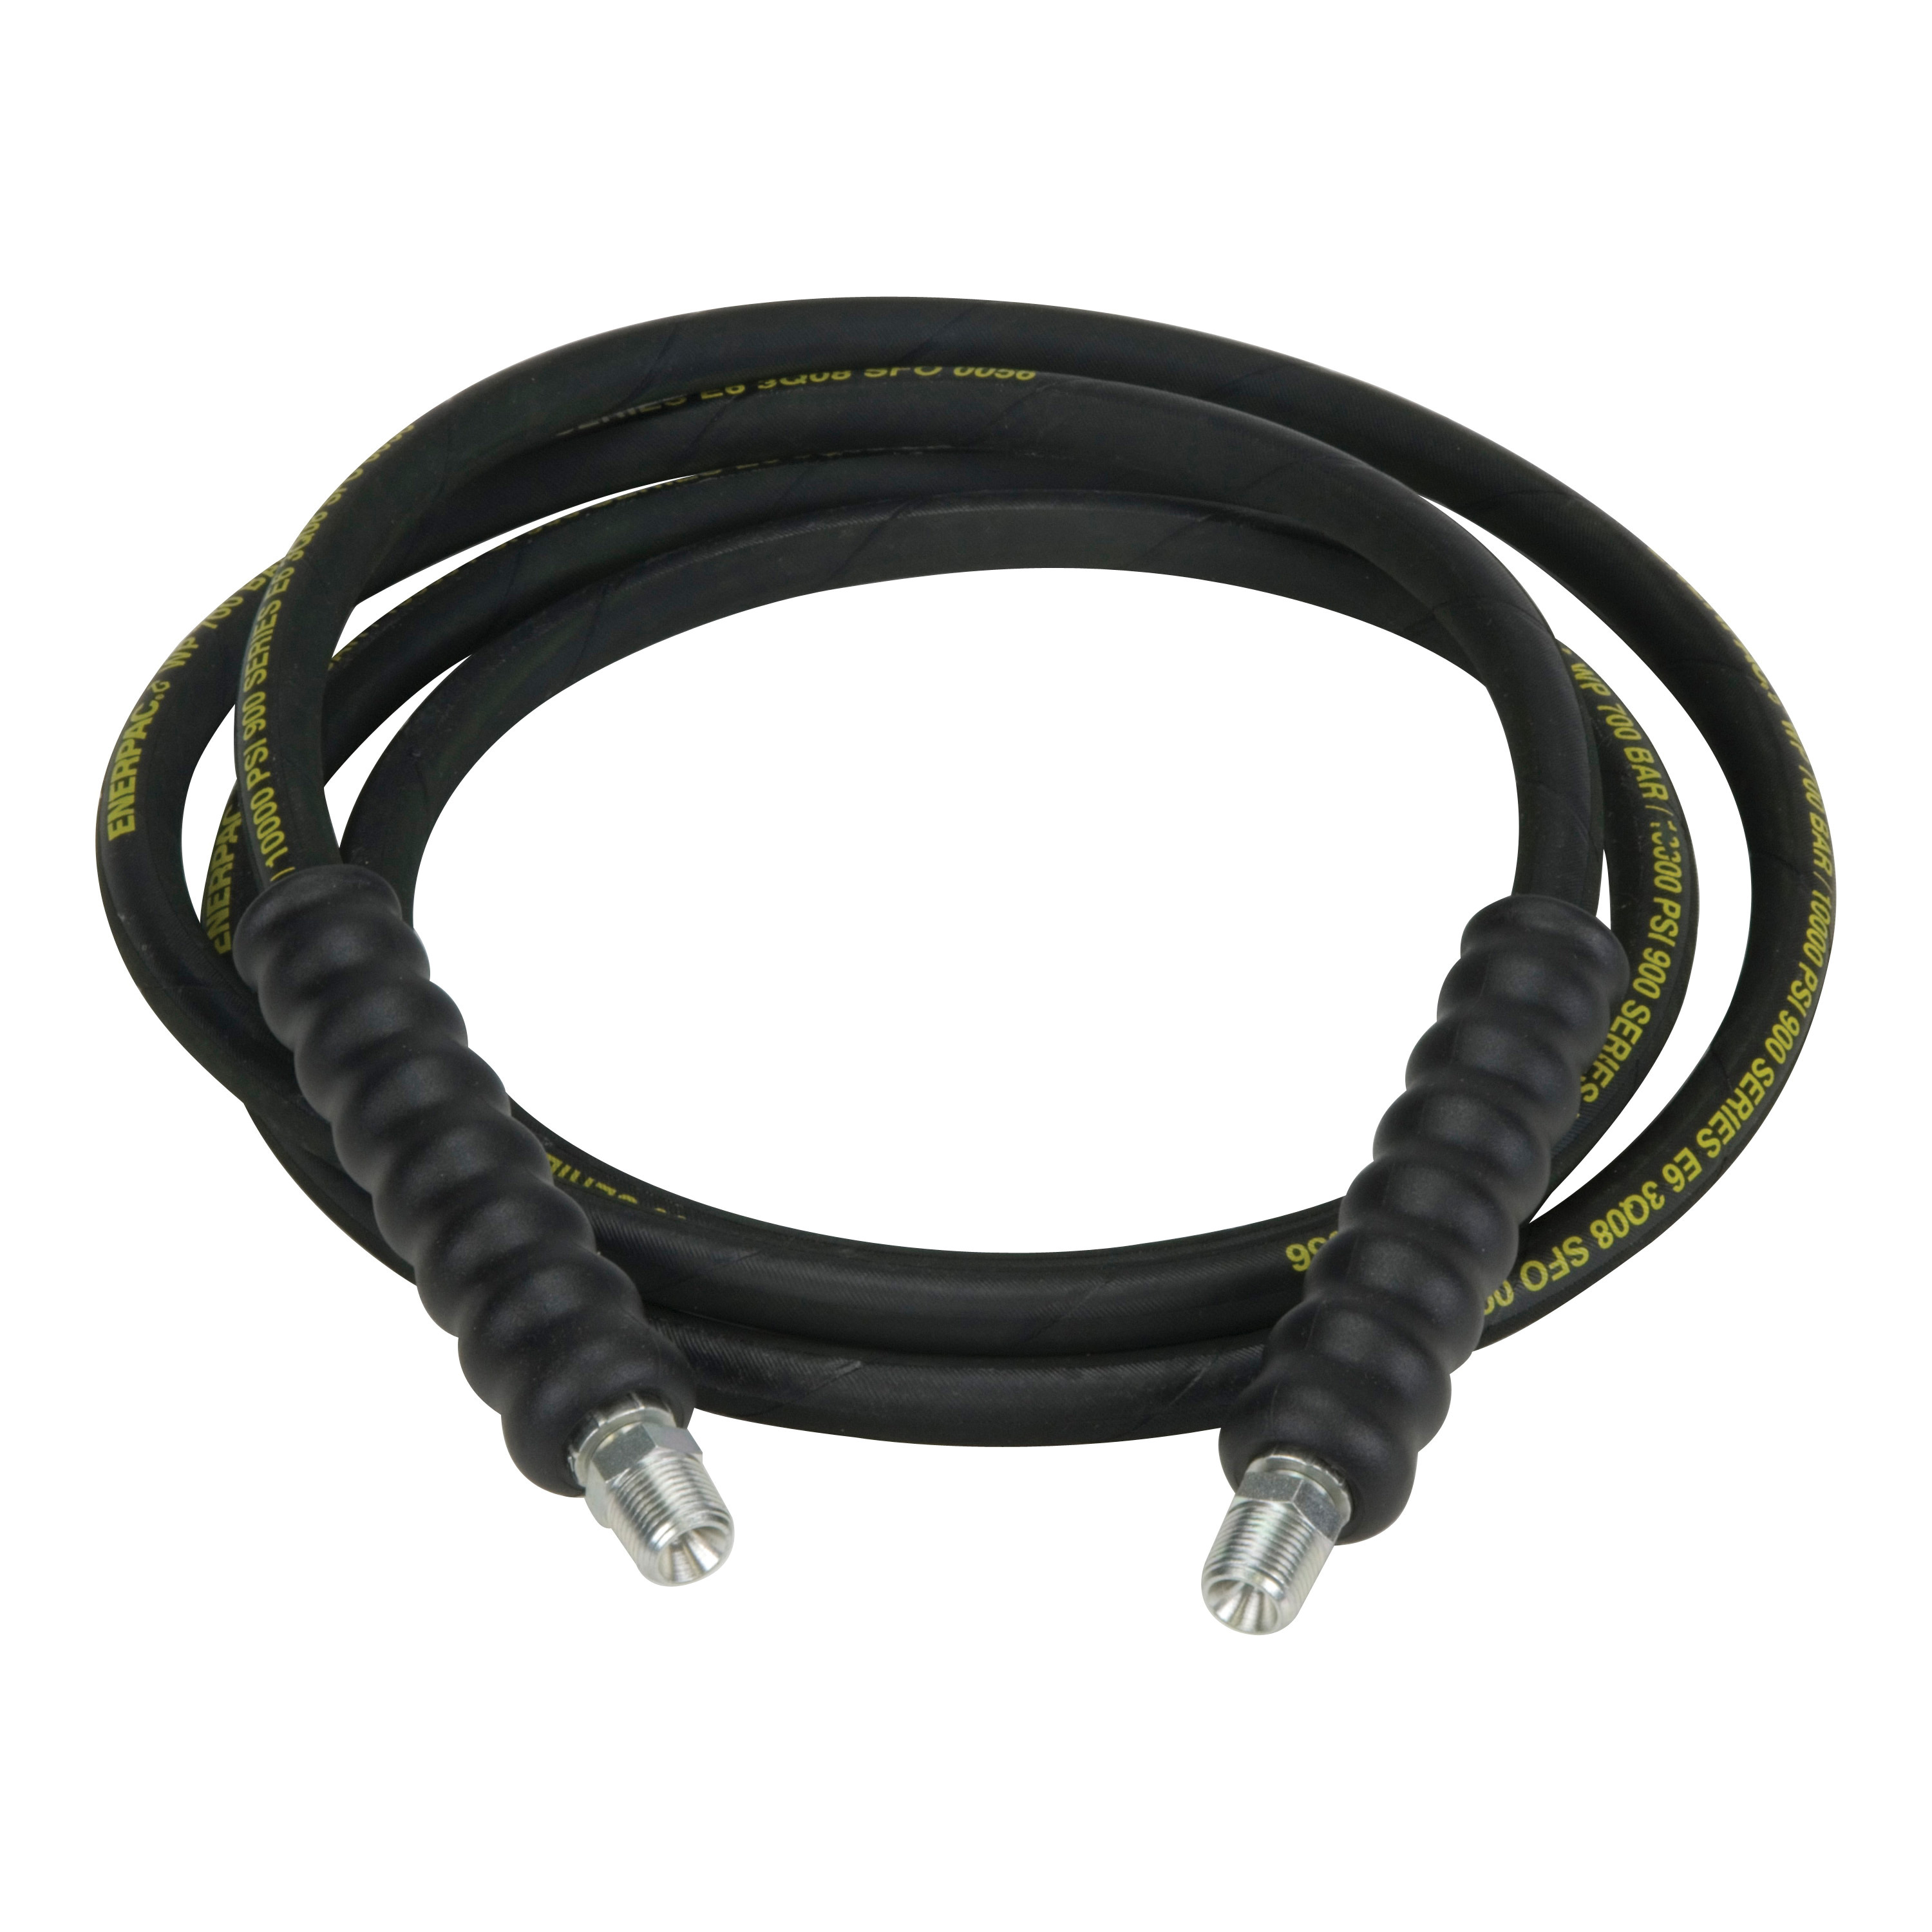 Enerpac® H-9206 High Pressure Hydraulic Hose, 3/8 in Nominal, MNPT End Style, 6 ft L, 700 bar Working, Rubber, Domestic